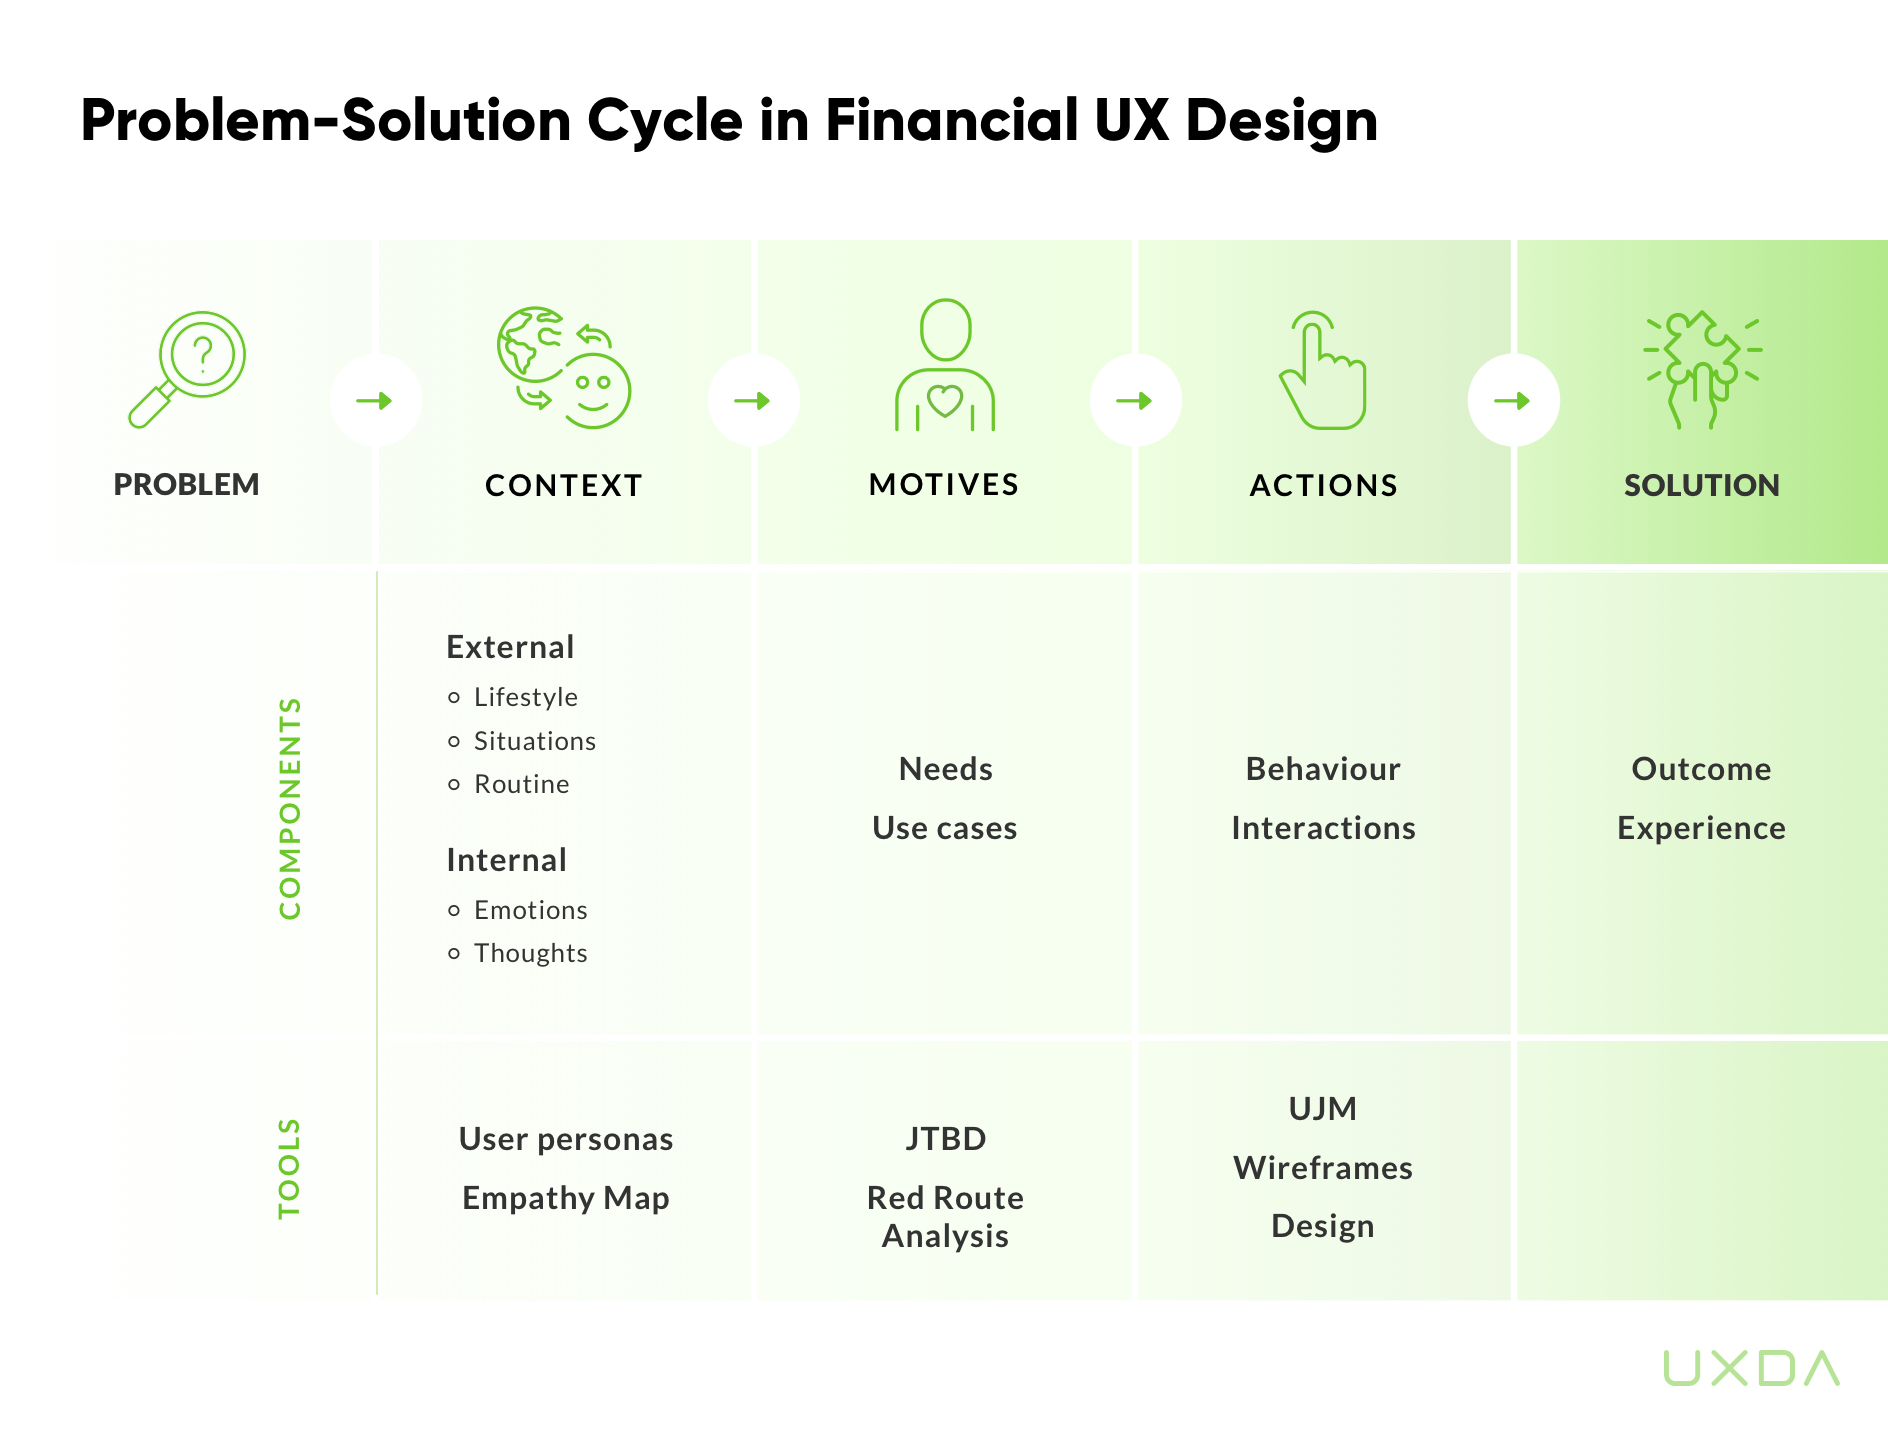 digital-financial-services-ux-problem-solution-cycle-1601343091.jpg